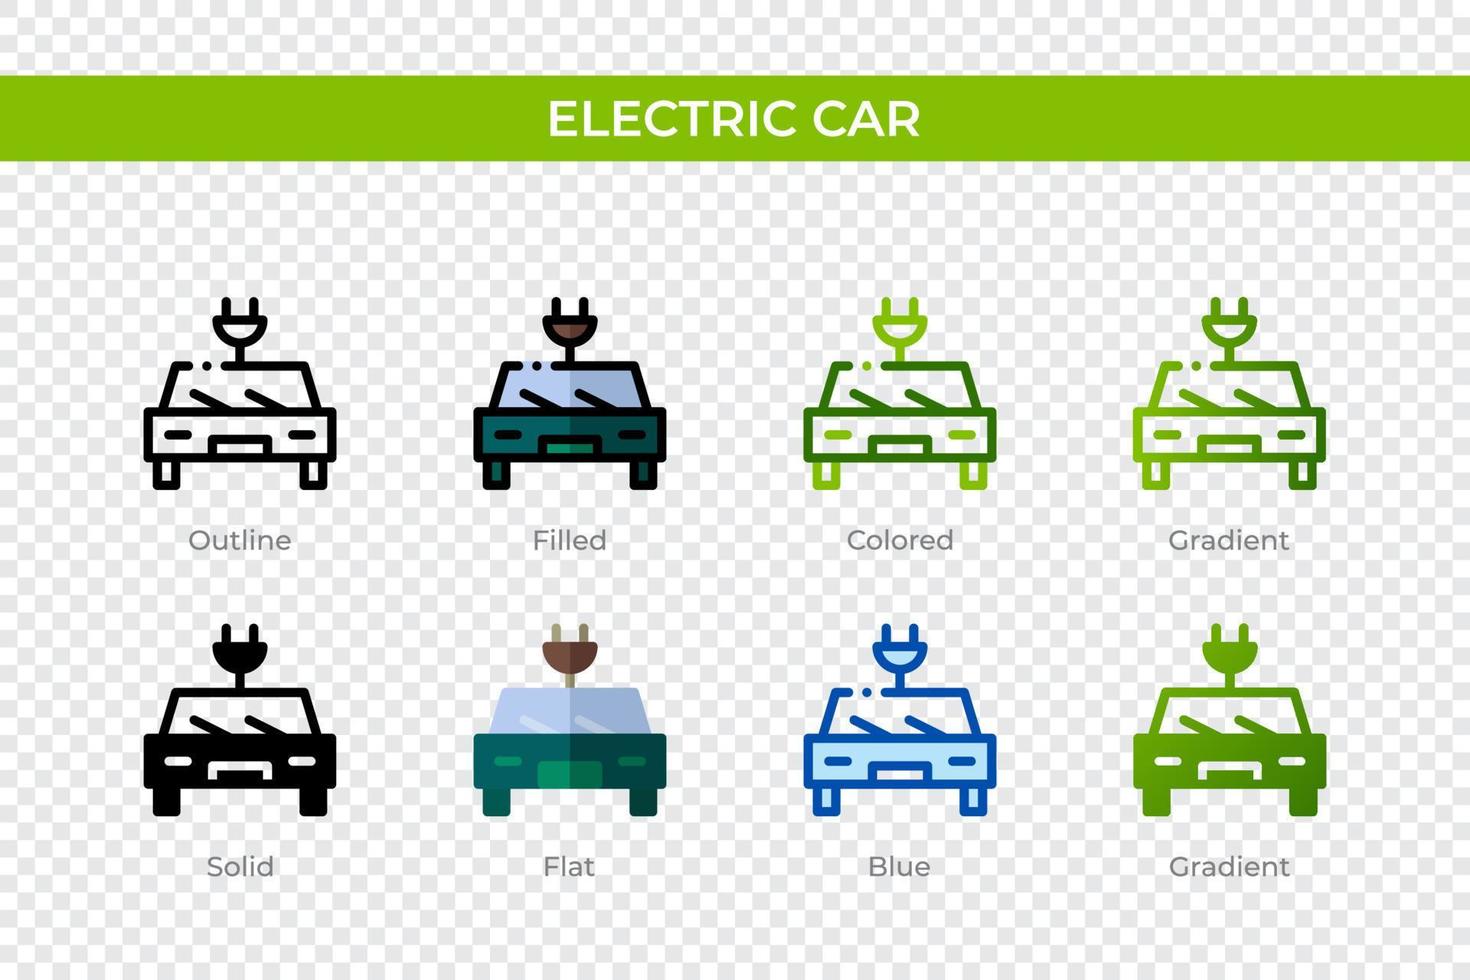 Electric car icon in different style. Electric car vector icons designed in outline, solid, colored, filled, gradient, and flat style. Symbol, logo illustration. Vector illustration